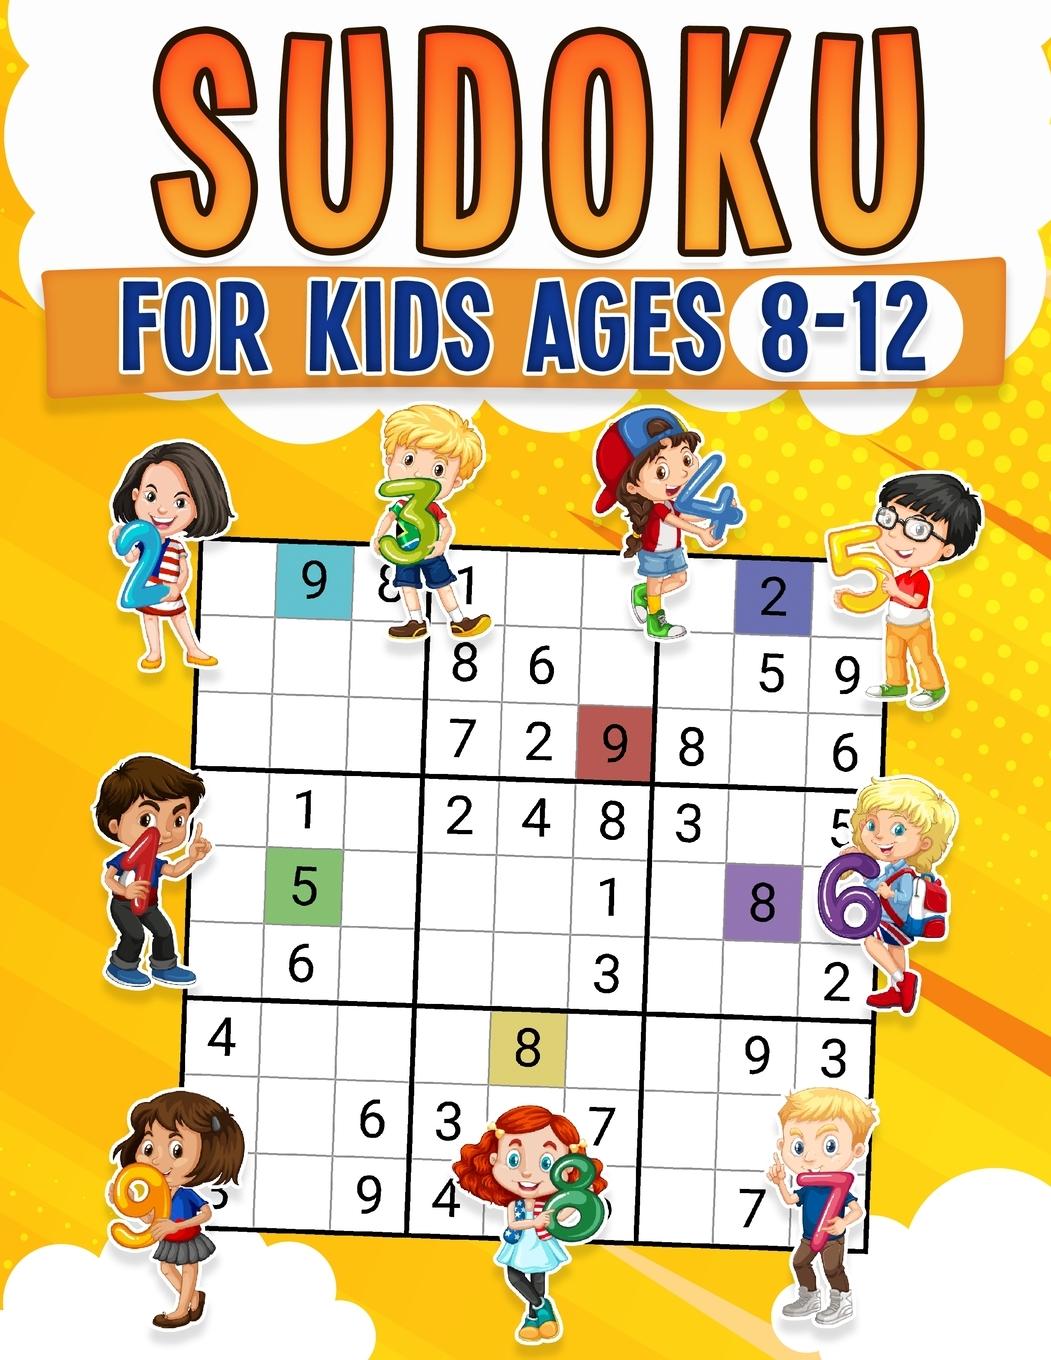 Kniha Sudoku for Kids Ages 8-12 | Childrens Activity Book With Over 340 Sudoku Puzzles | Grids Include 4x4, 6x6, and 9x9 | Easy, Medium, and Hard Skill Leve 